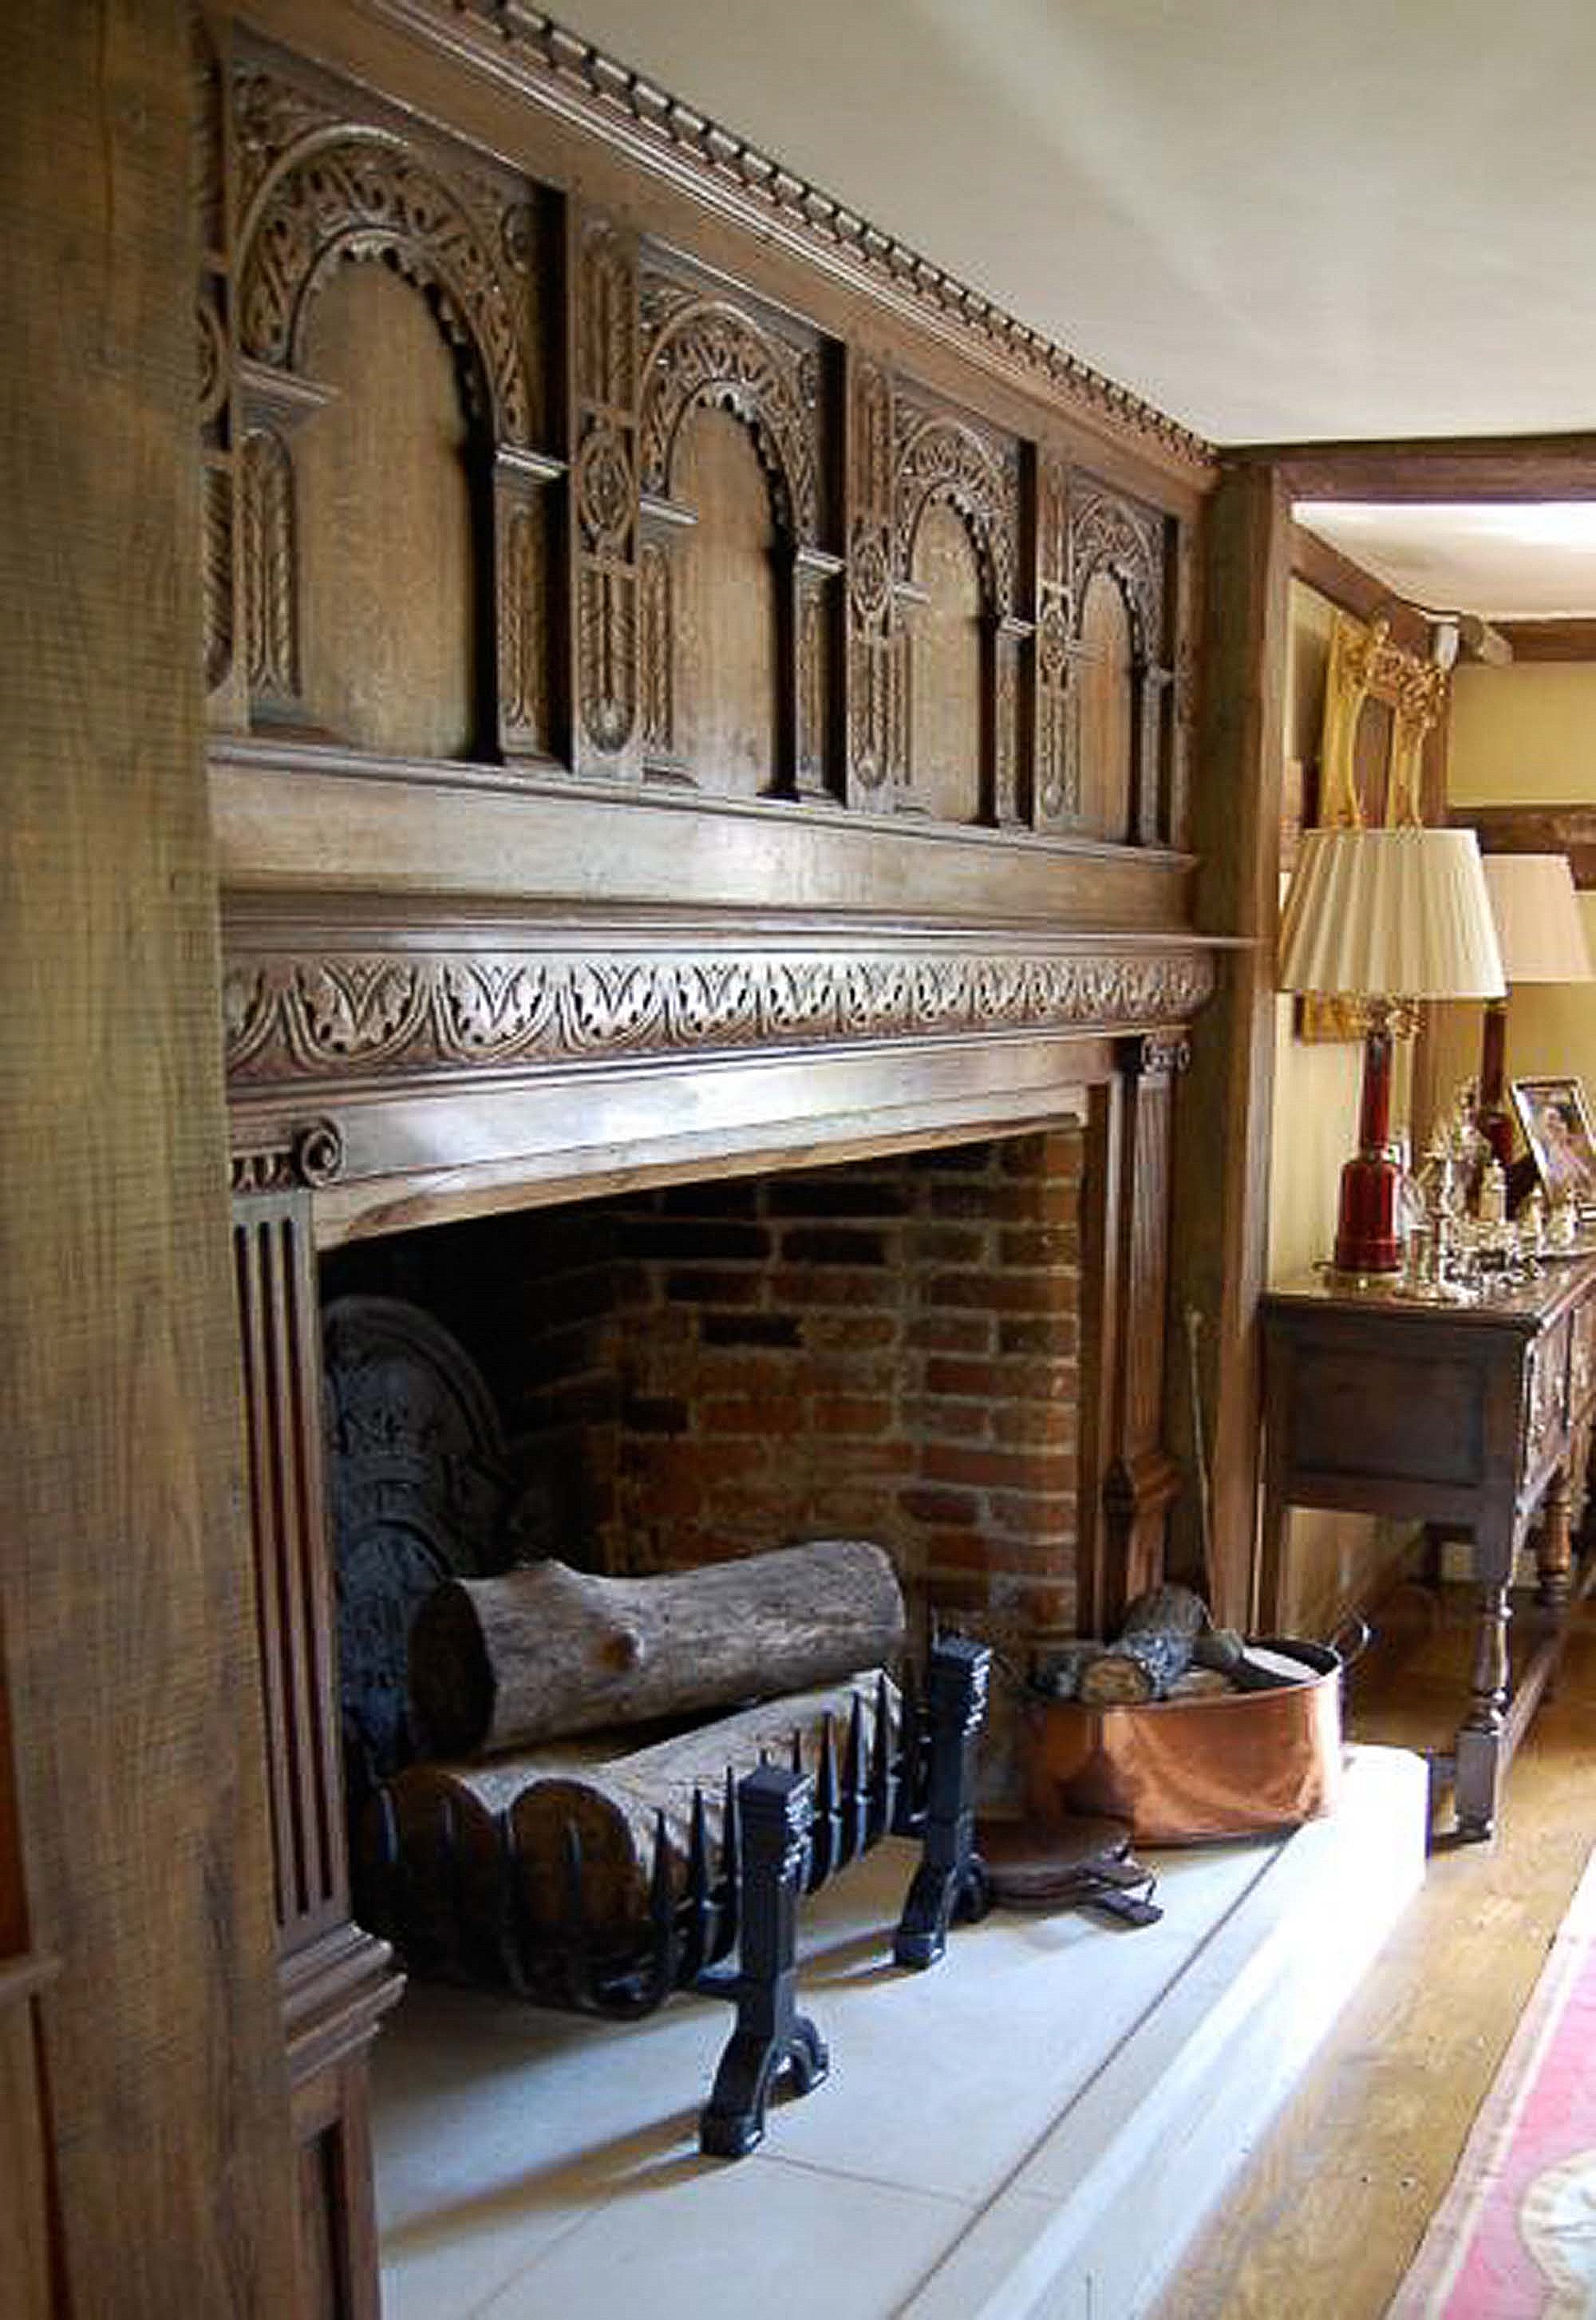 16th and 17th century style oak panlled fireplace with highley decorative carved arches